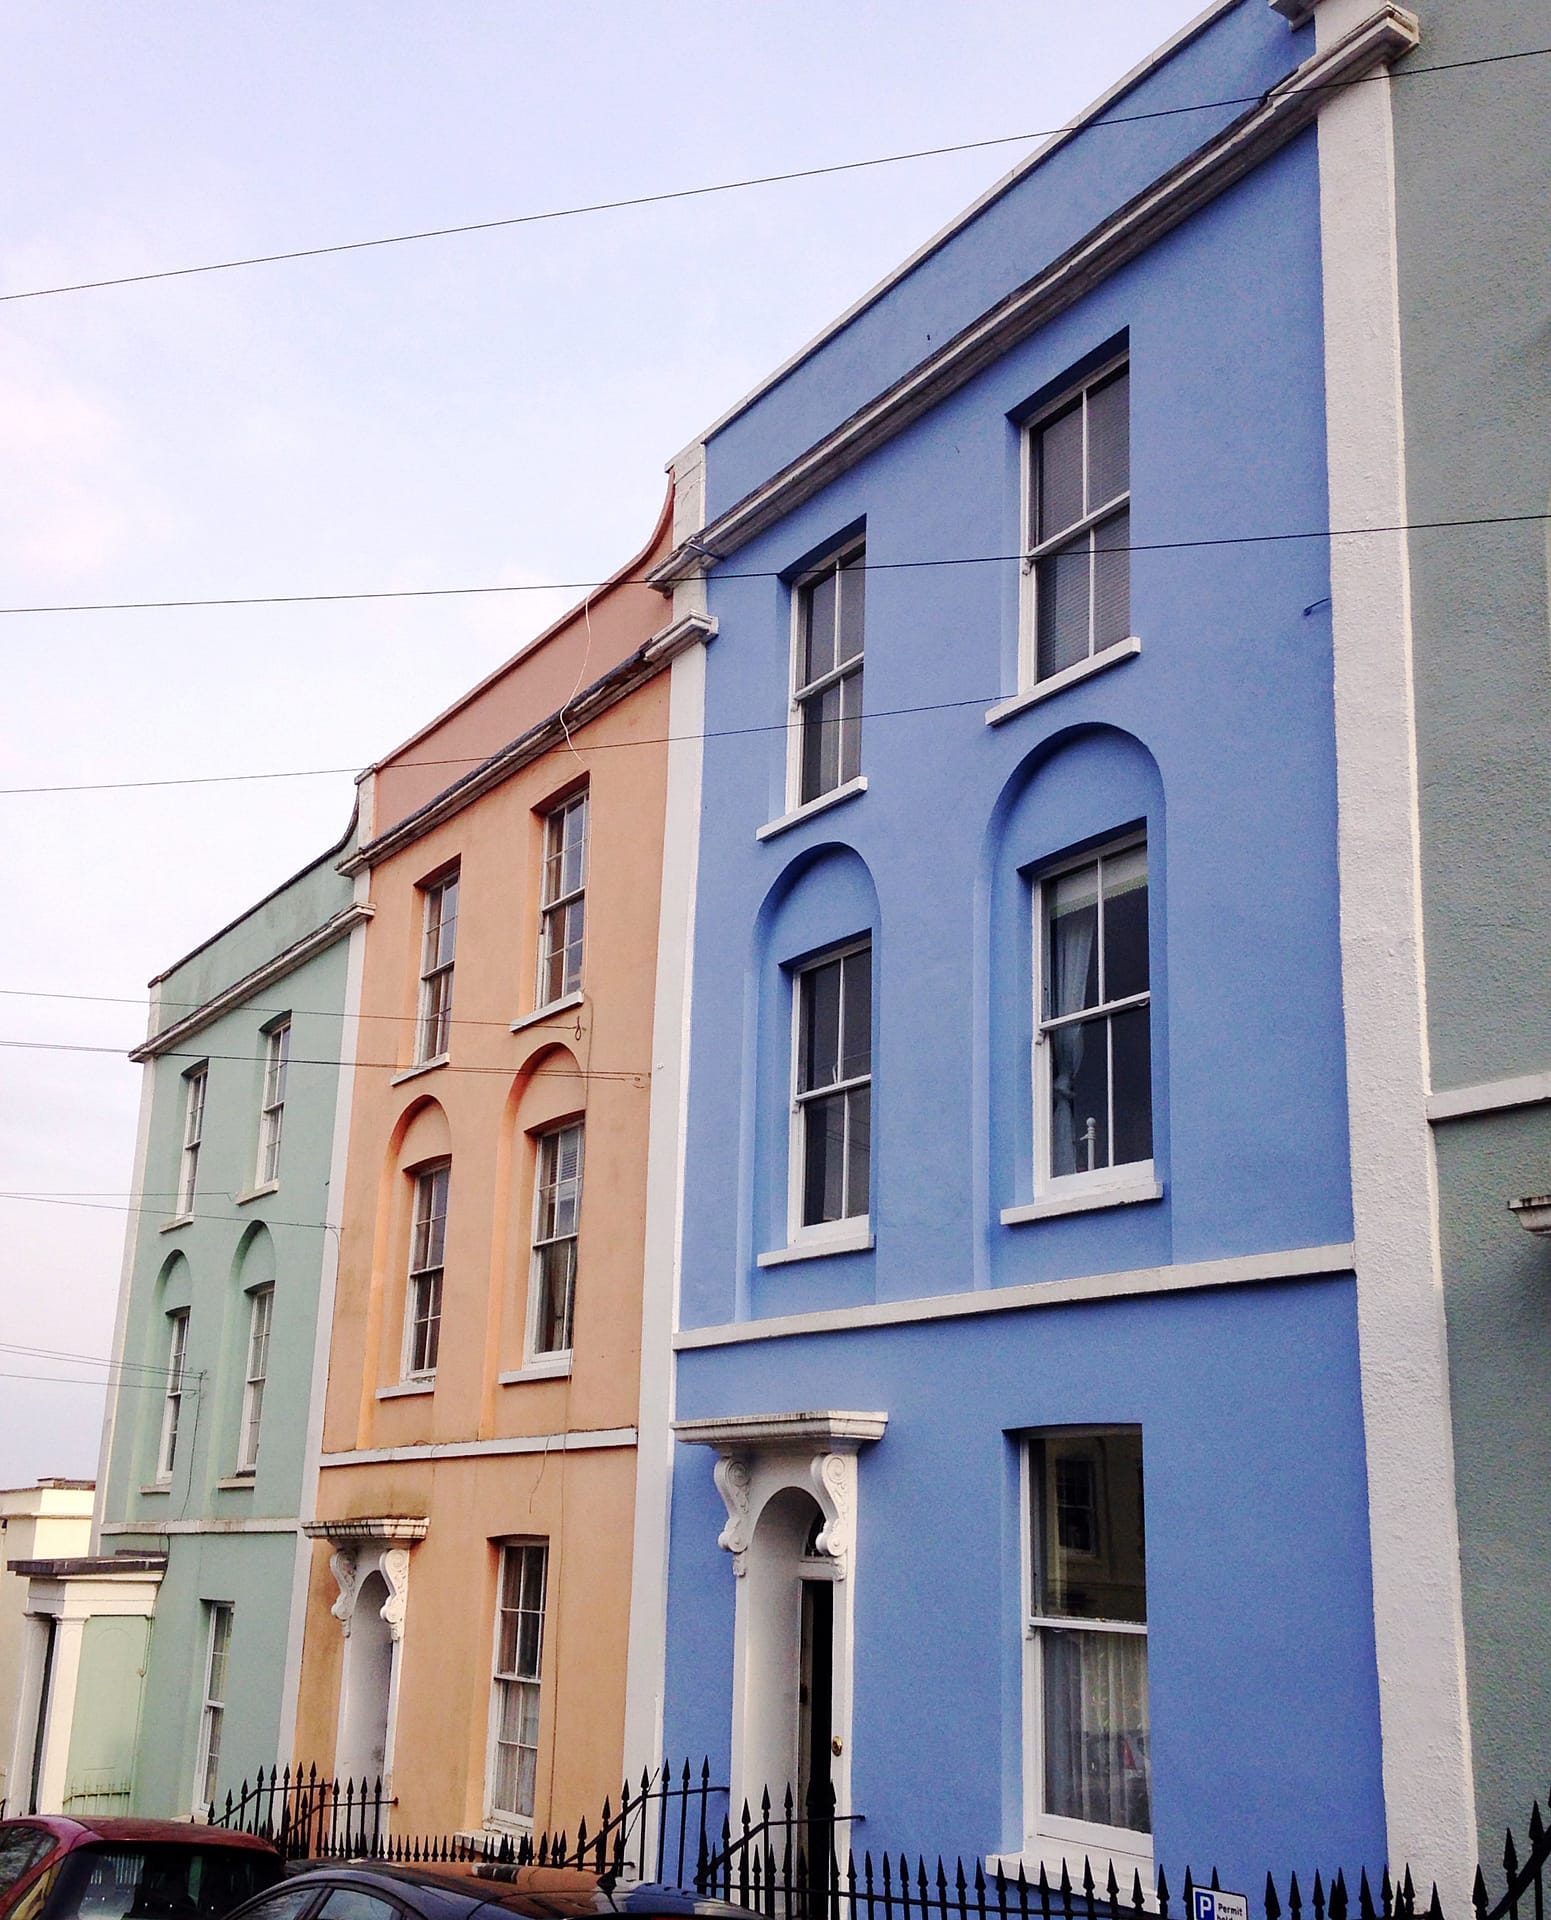 Mint green, coral and blue row of painted houses in Kingsdown Brisol